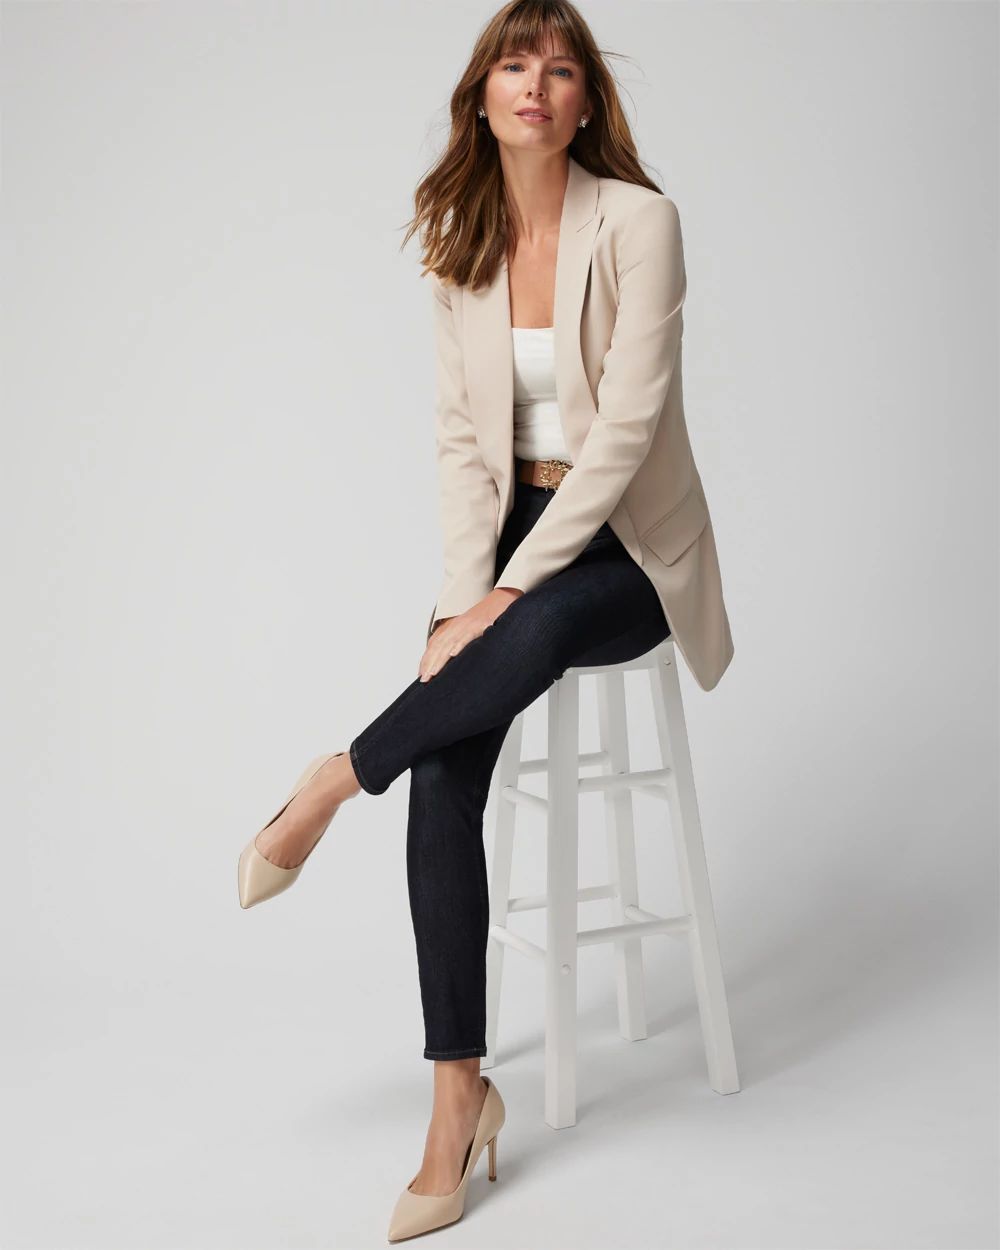 The Relaxed Blazer